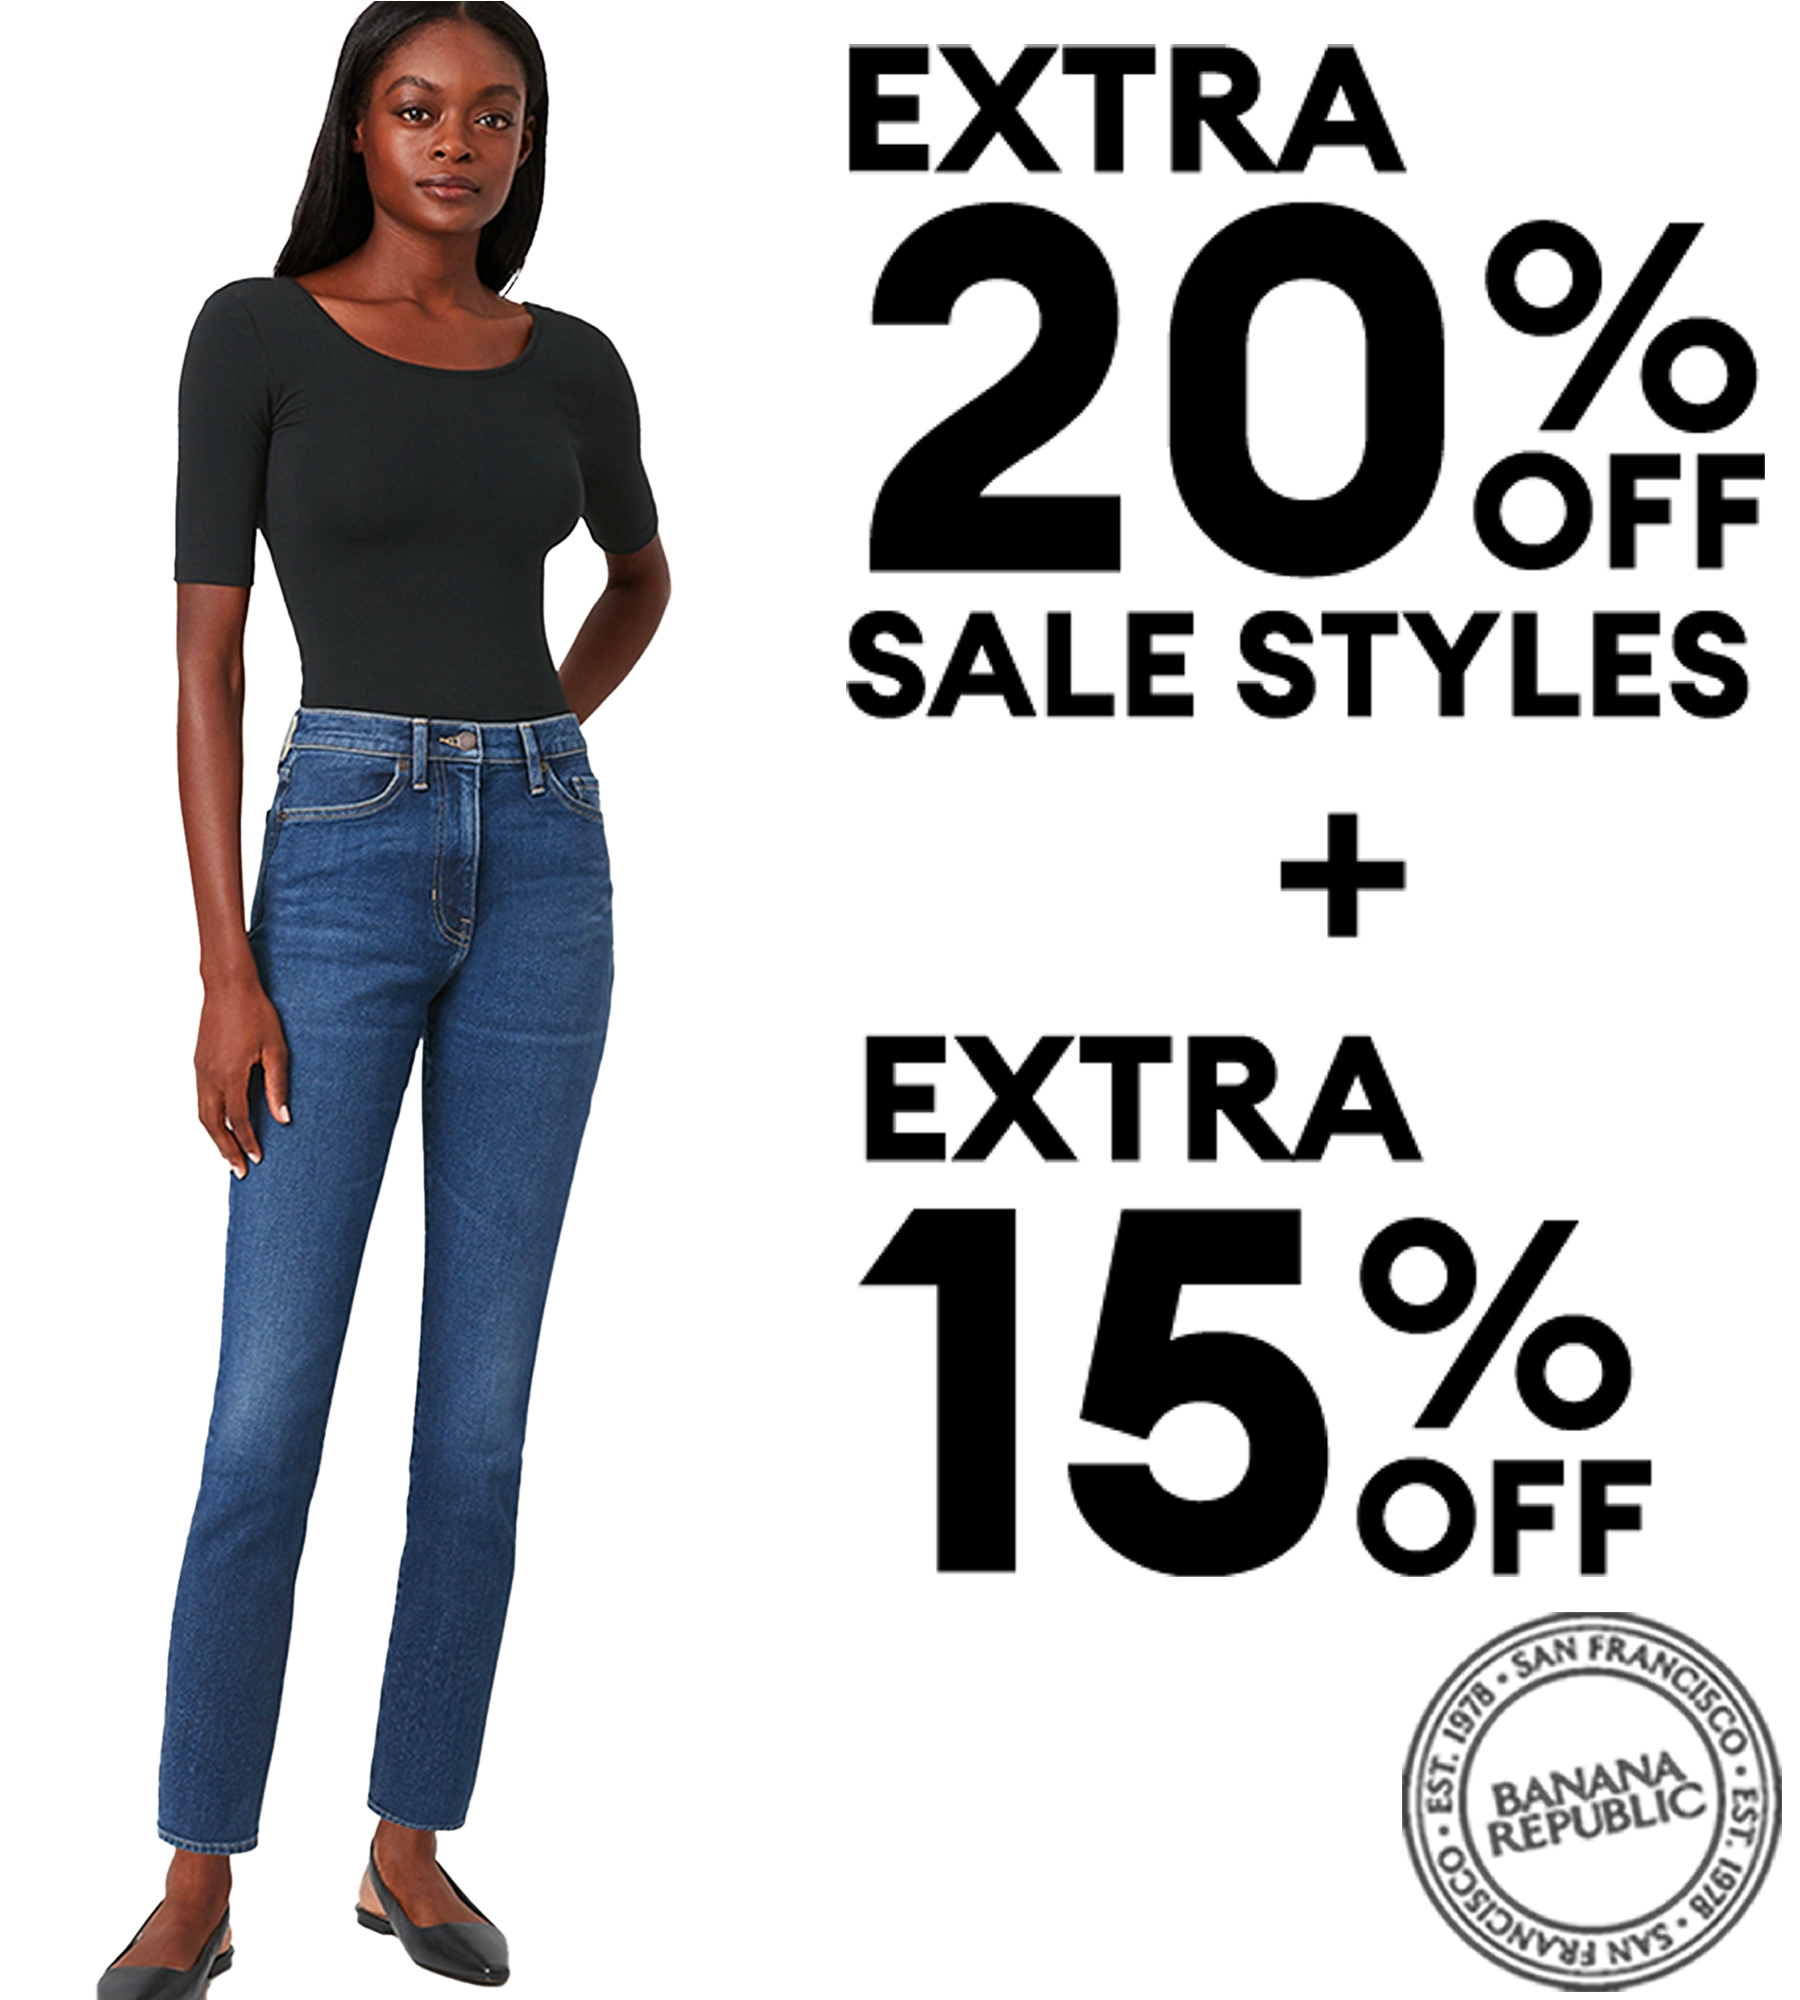 Banana Republic Jeans: Petites $10.90, Women's $14.25 | Men's Heritage Cargo Pants (28.5-in L) $13.60 and More + FS from $34+